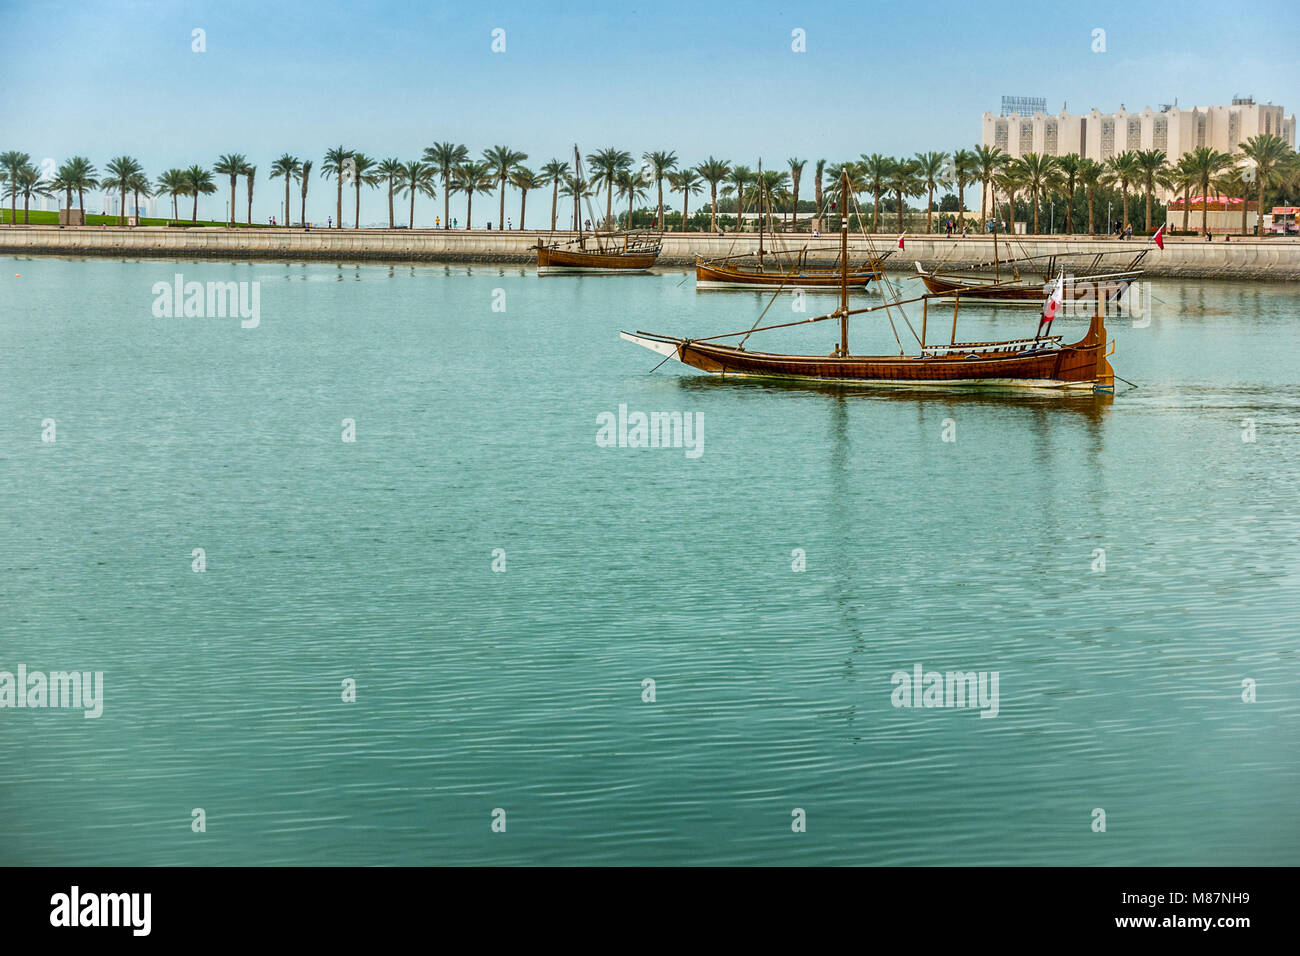 Dhows on the Corniche in Doha Stock Photo